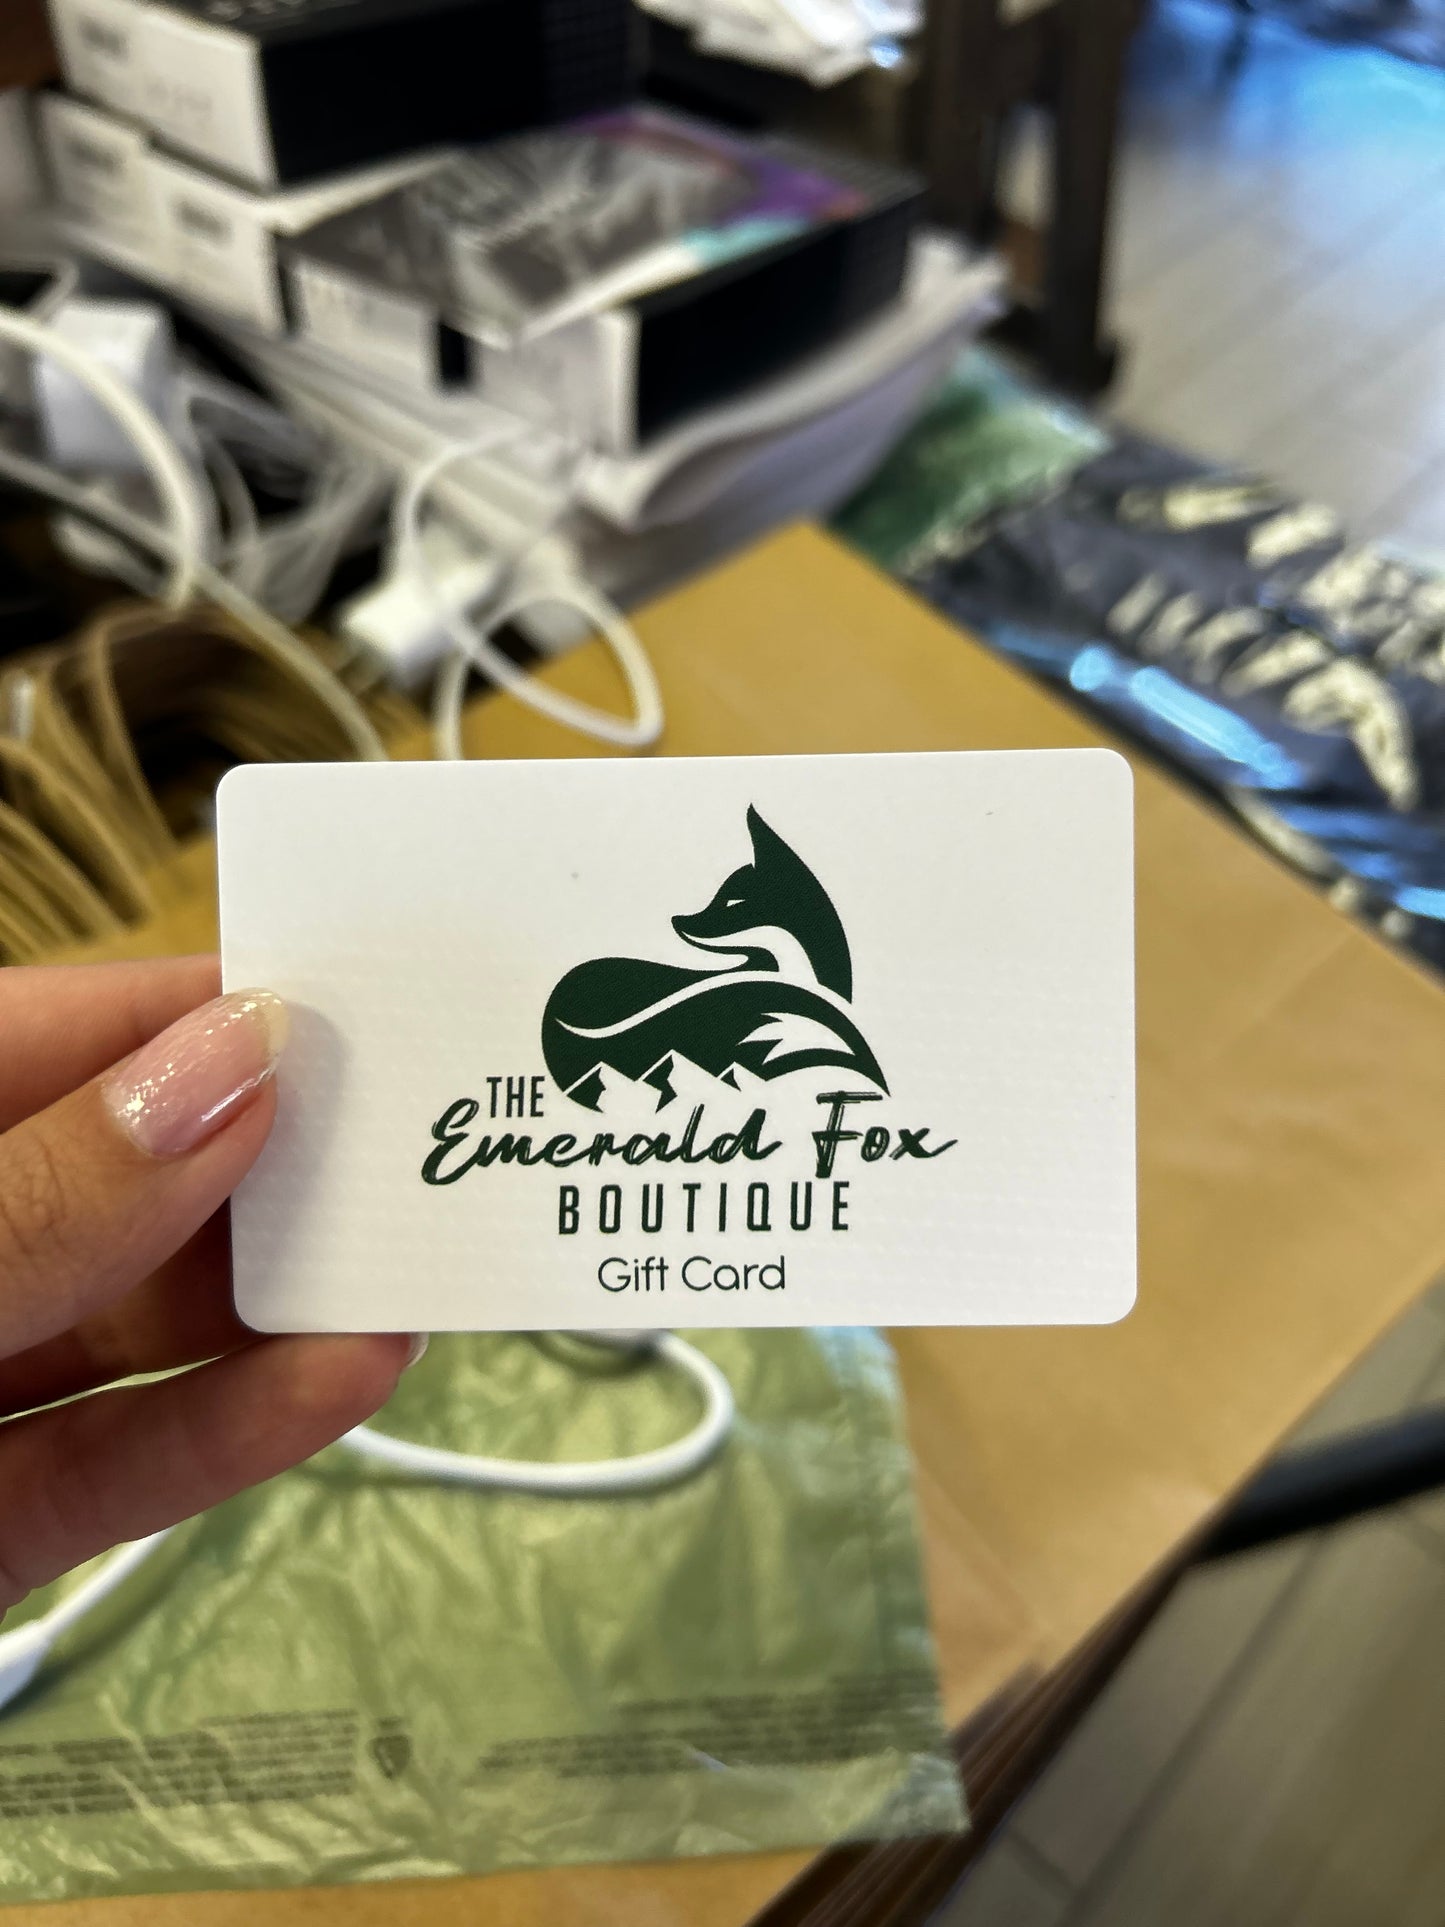 The Emerald Fox Boutique Gift Card.